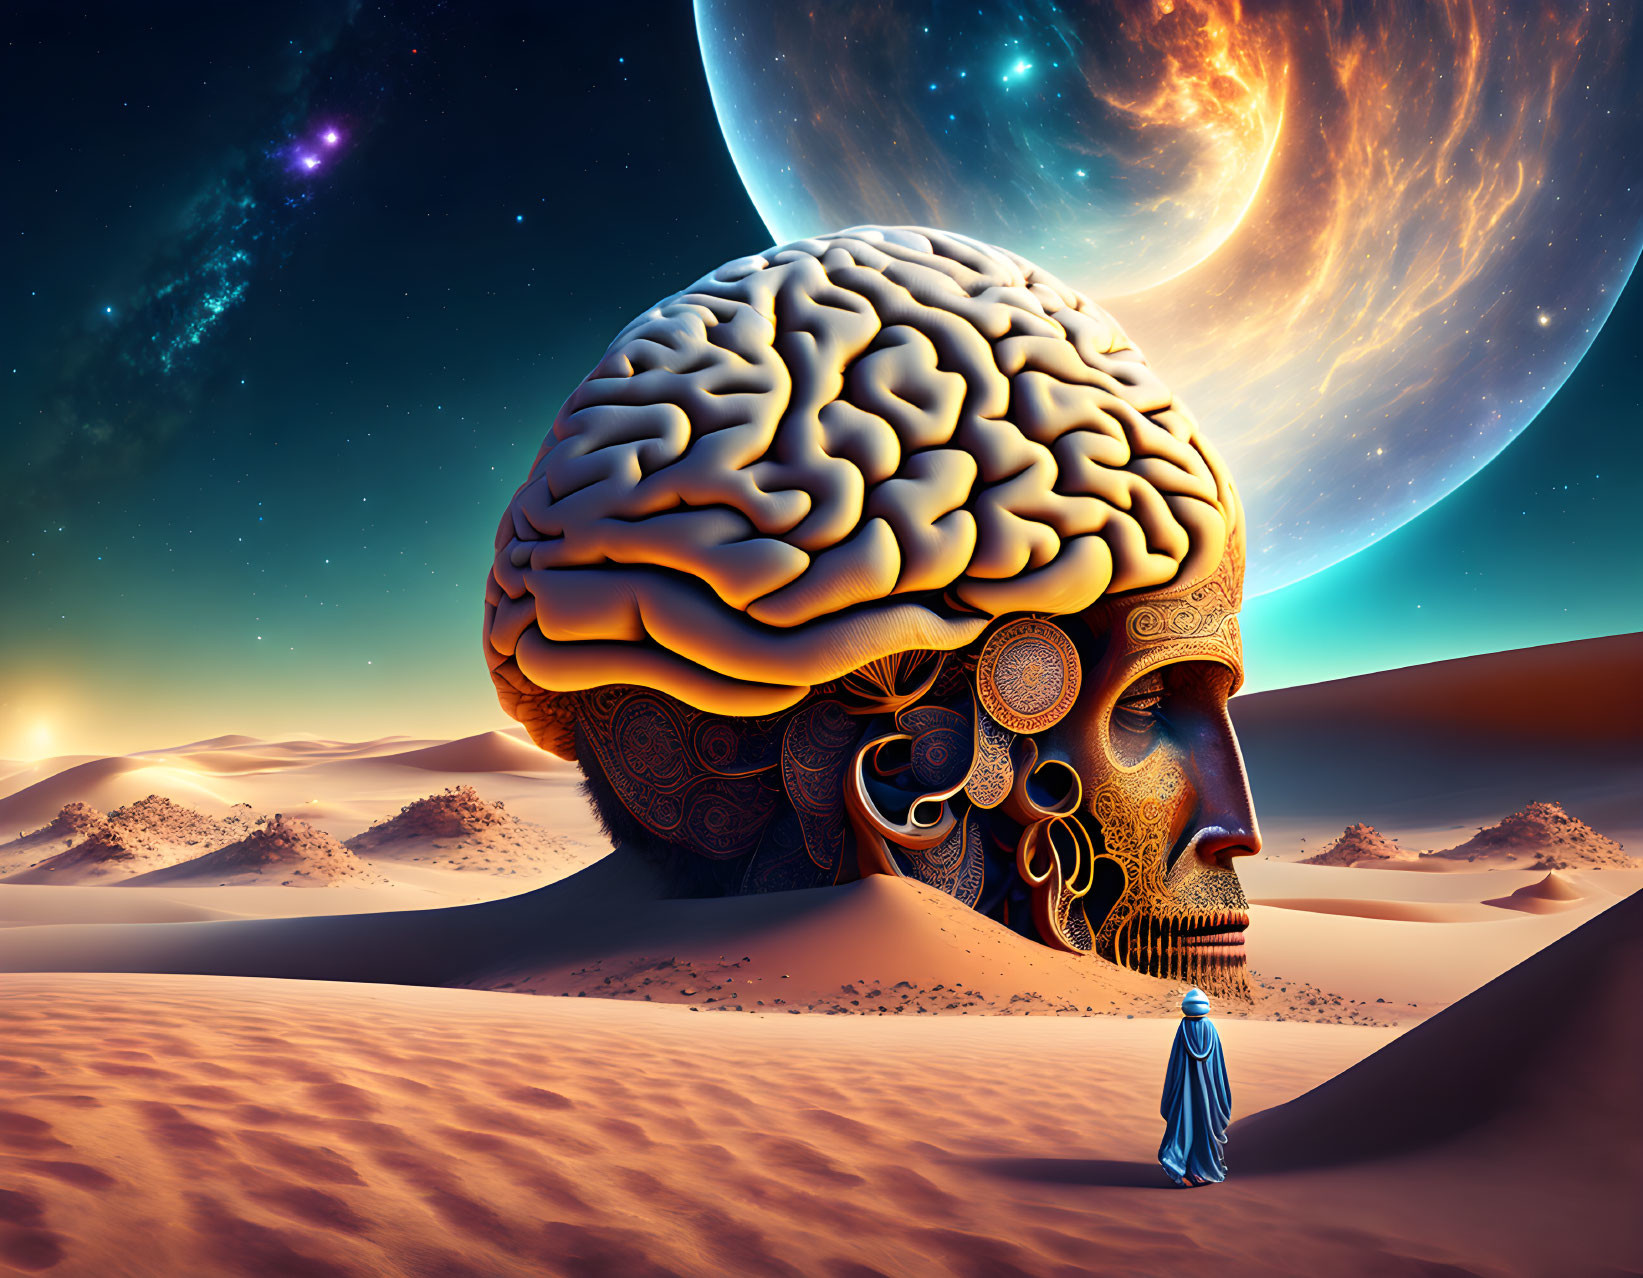 Surreal illustration of giant human head with exposed brain in desert landscape